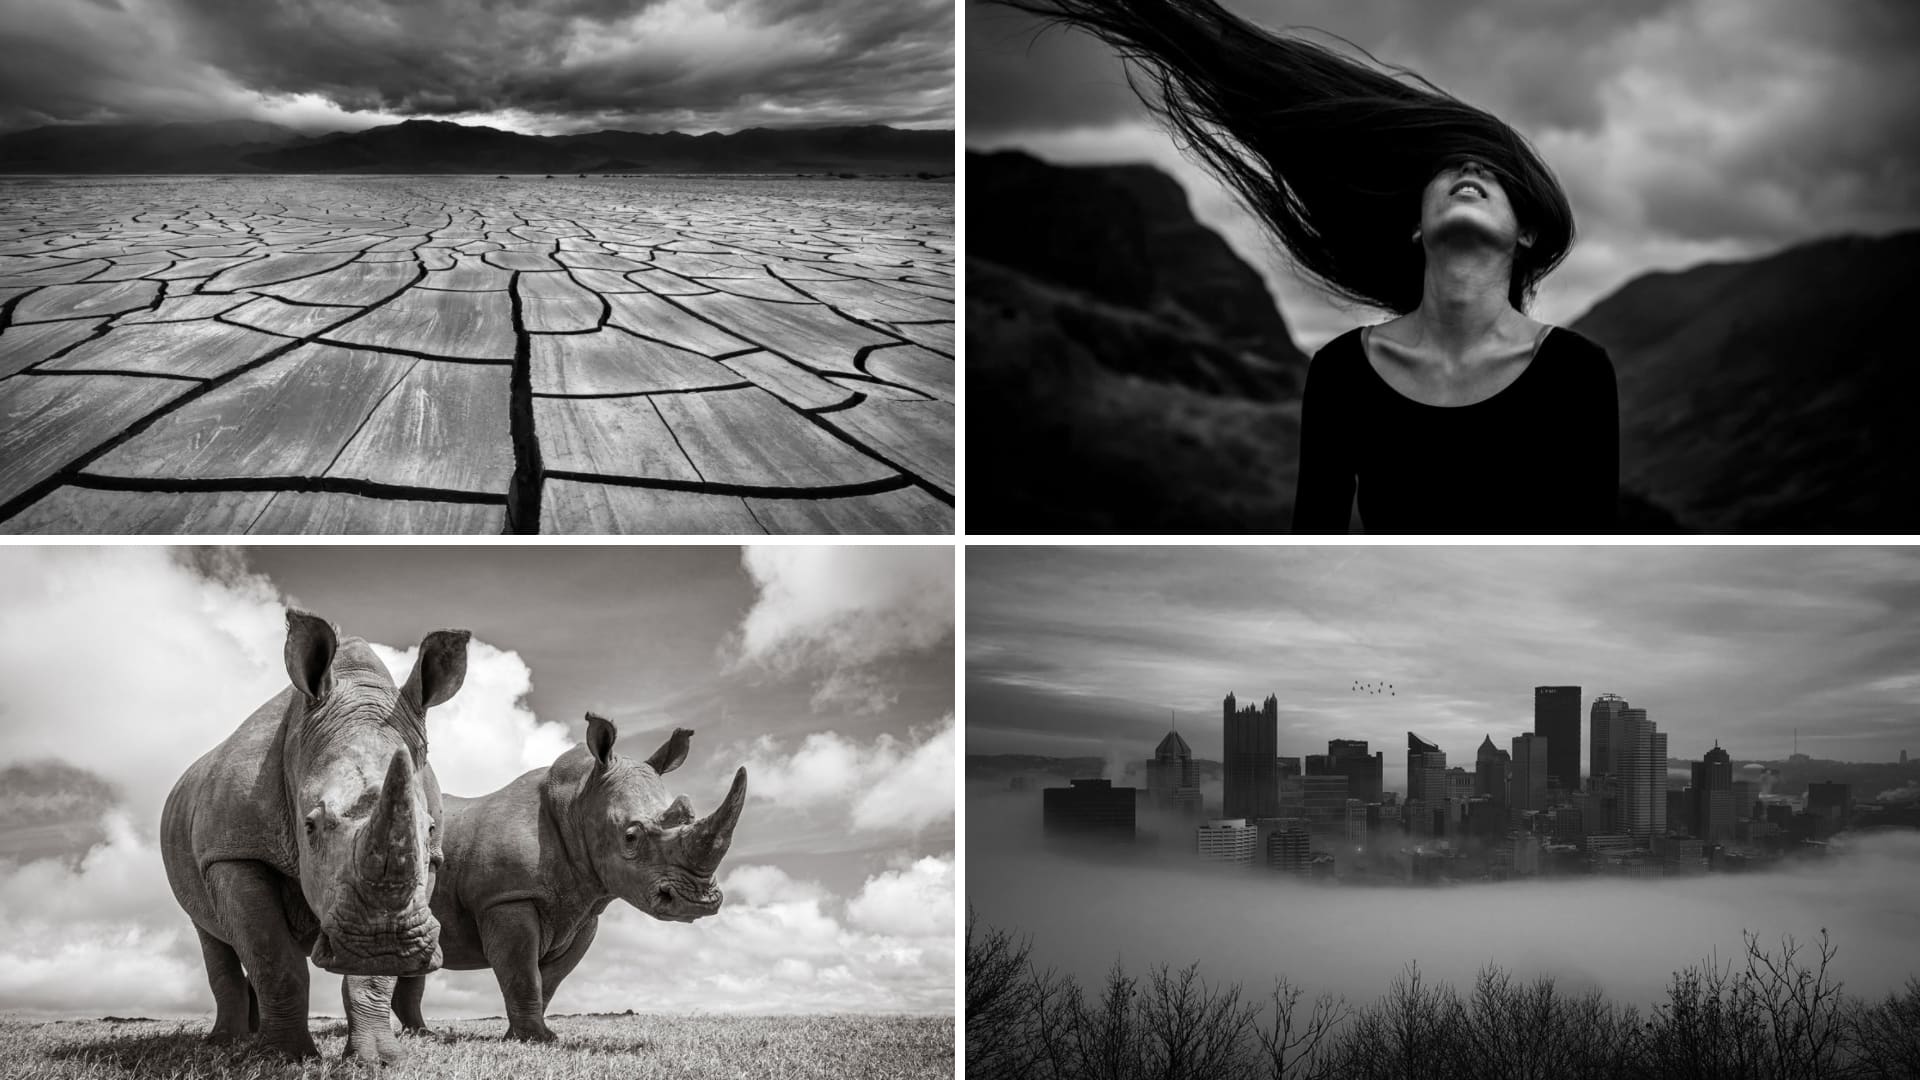 How to master black and white photography